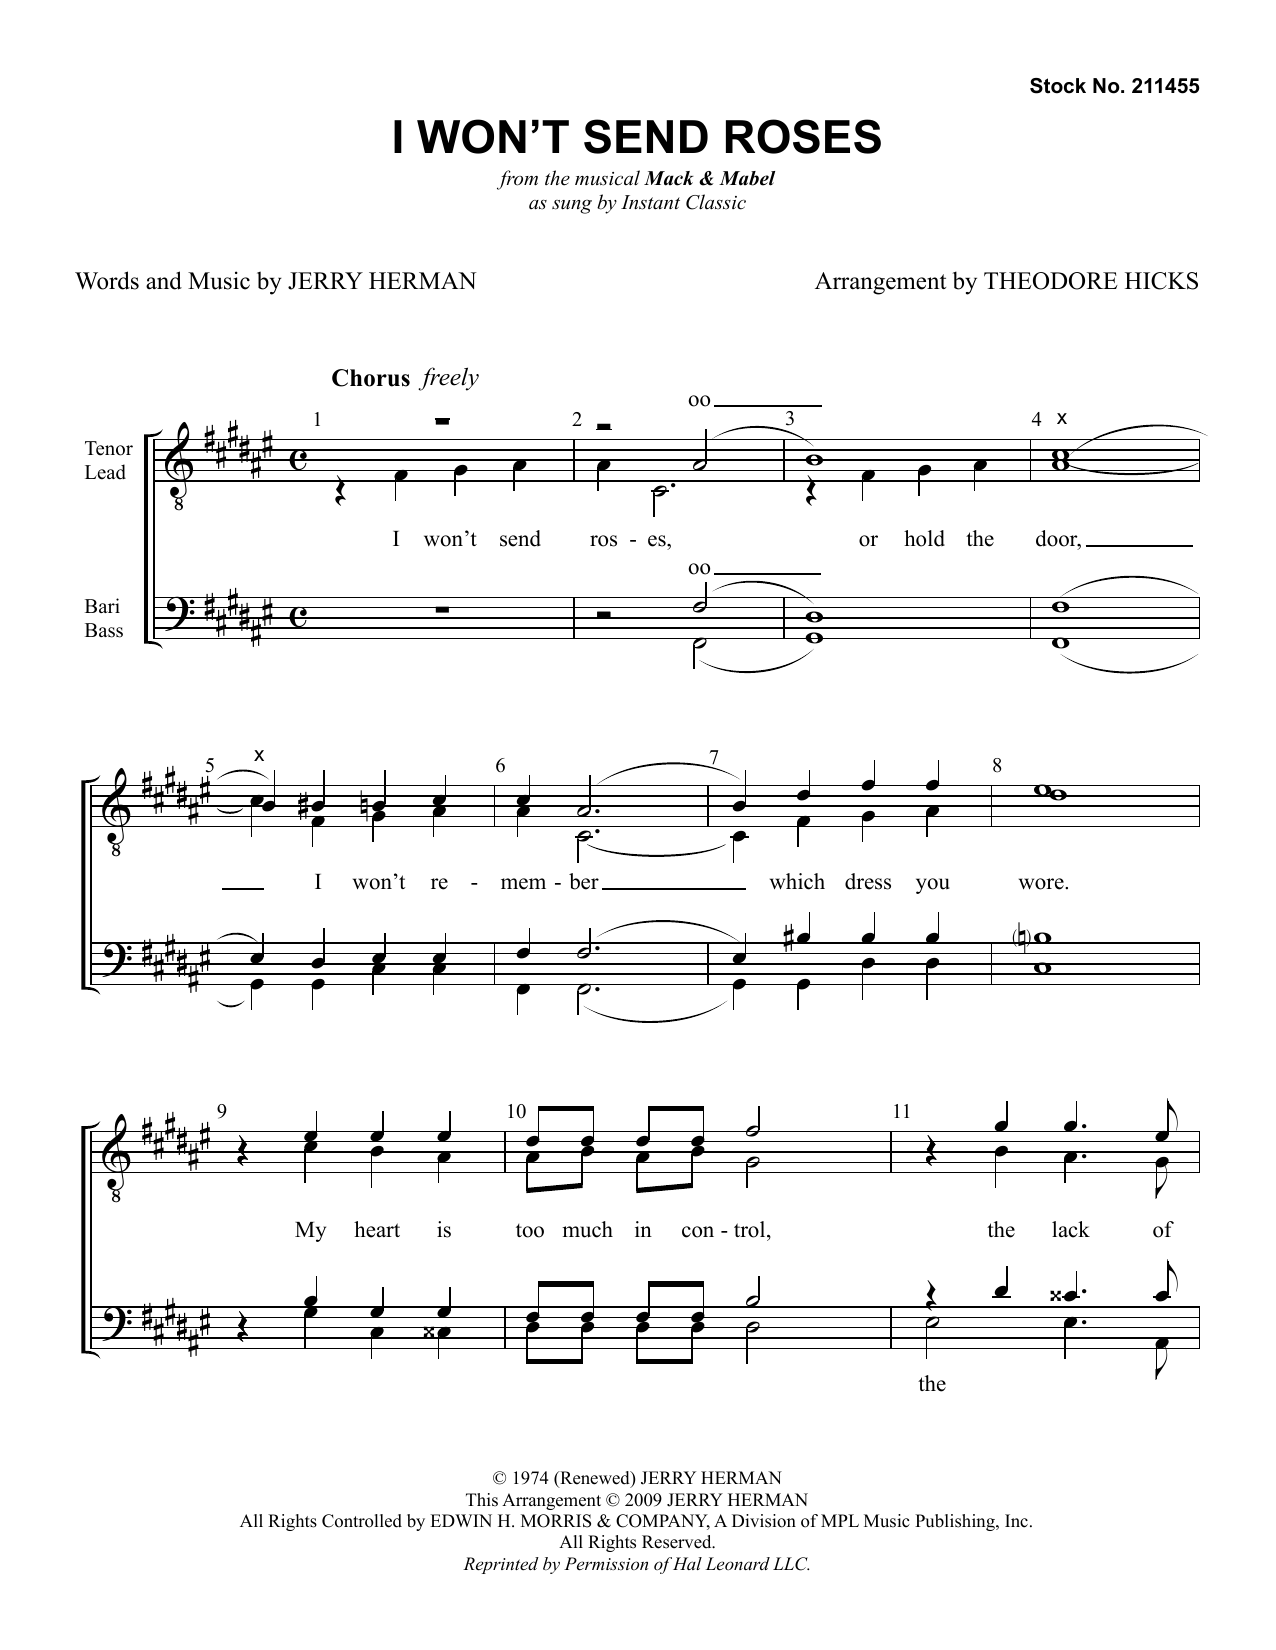 Download Instant Classic I Won't Send Roses (from Mack & Mabel) Sheet Music